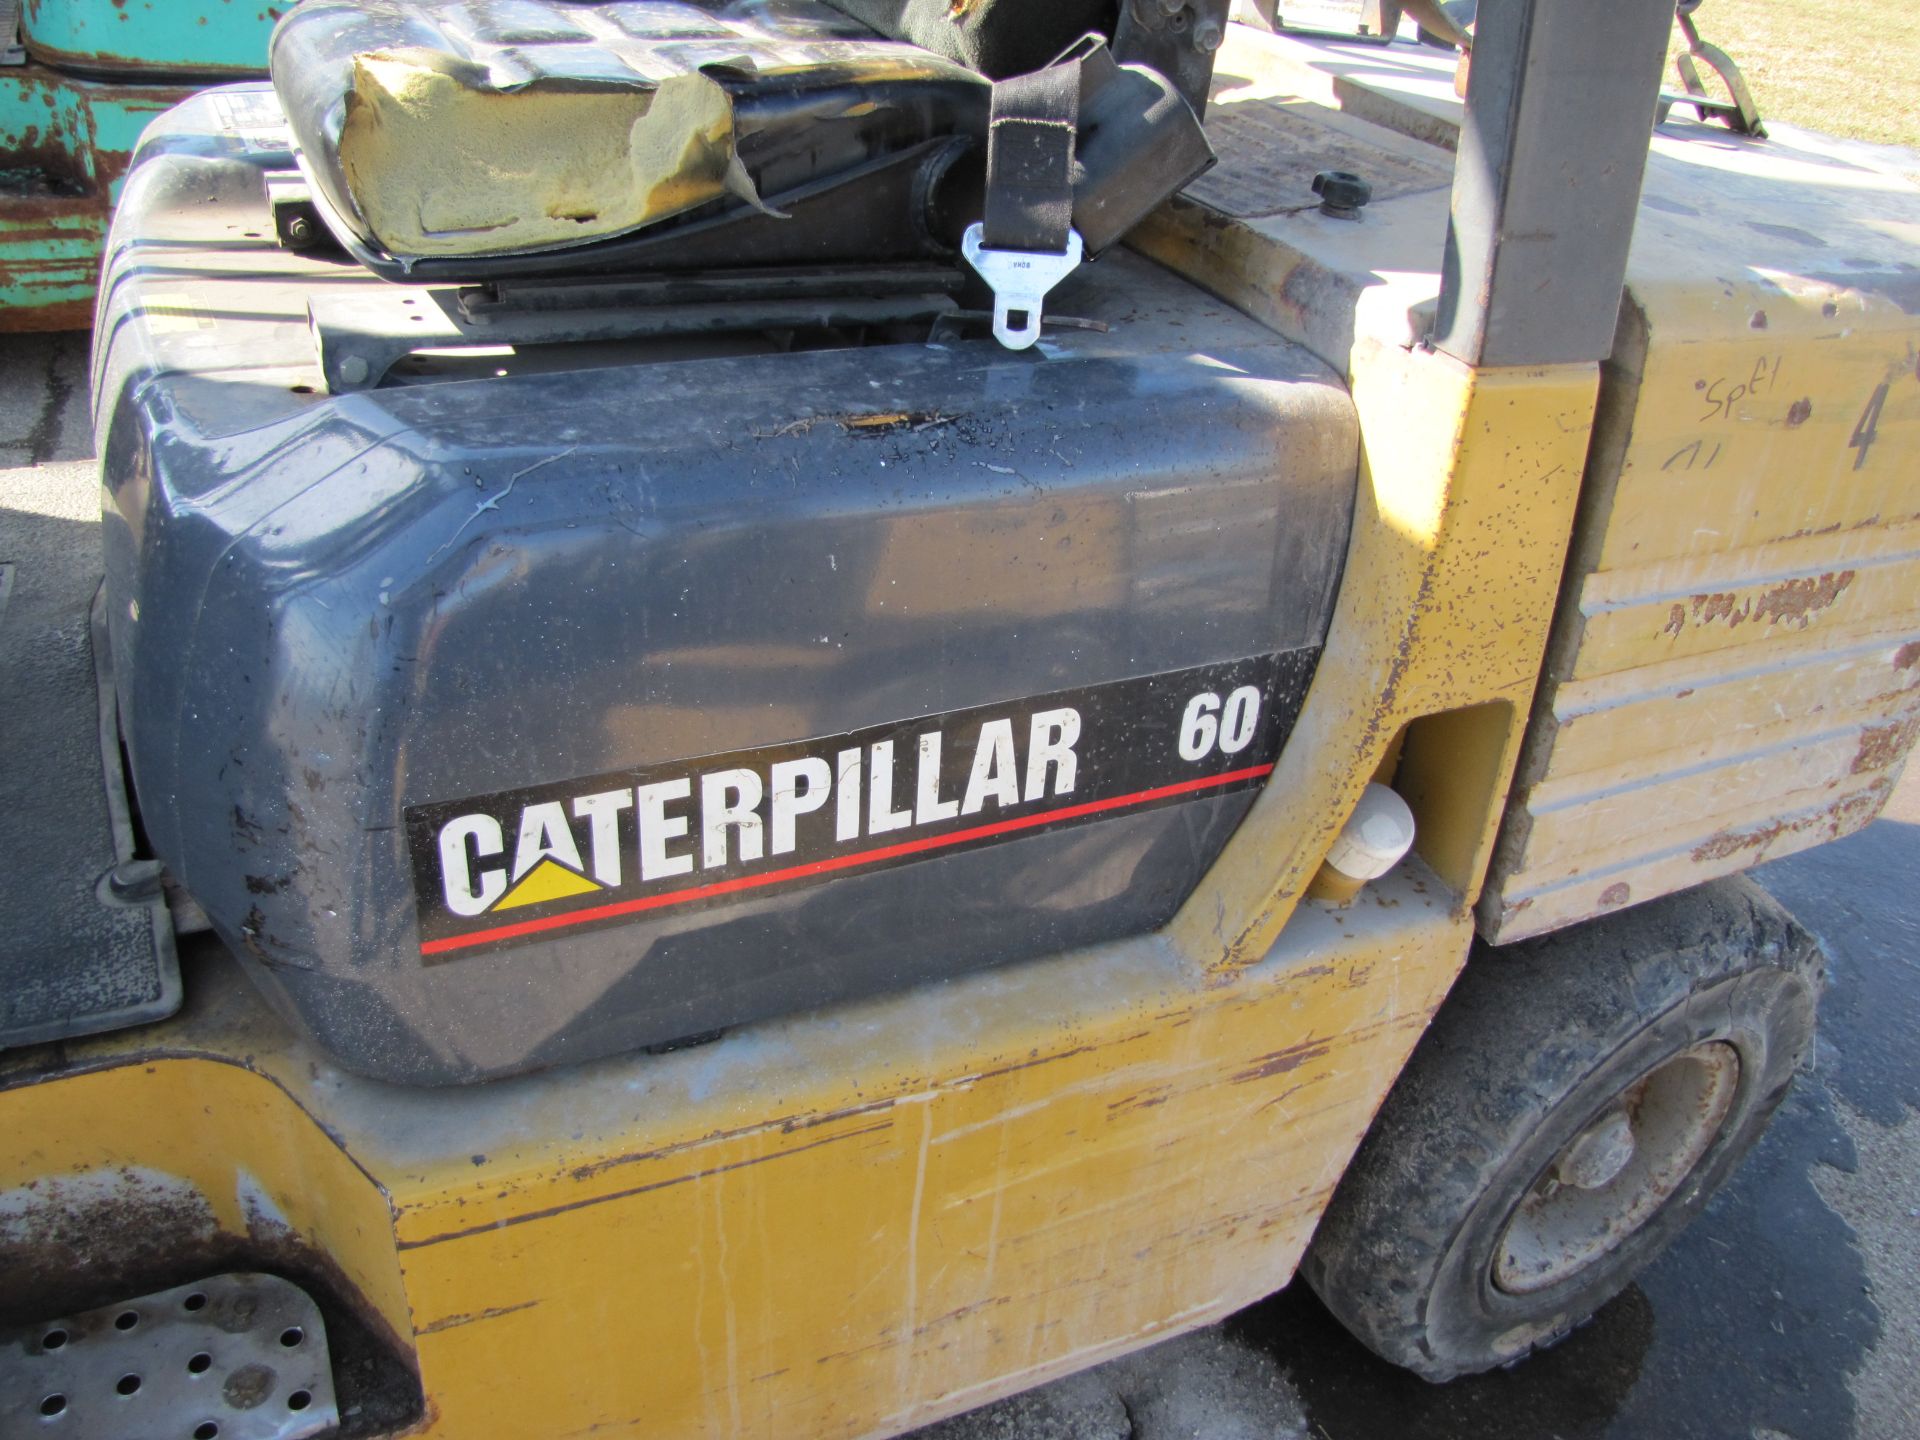 Caterpillar 60 forklift, 4500 lb capacity, propane, 3-stage, side shift, 28x9/15 fronts - Image 16 of 17